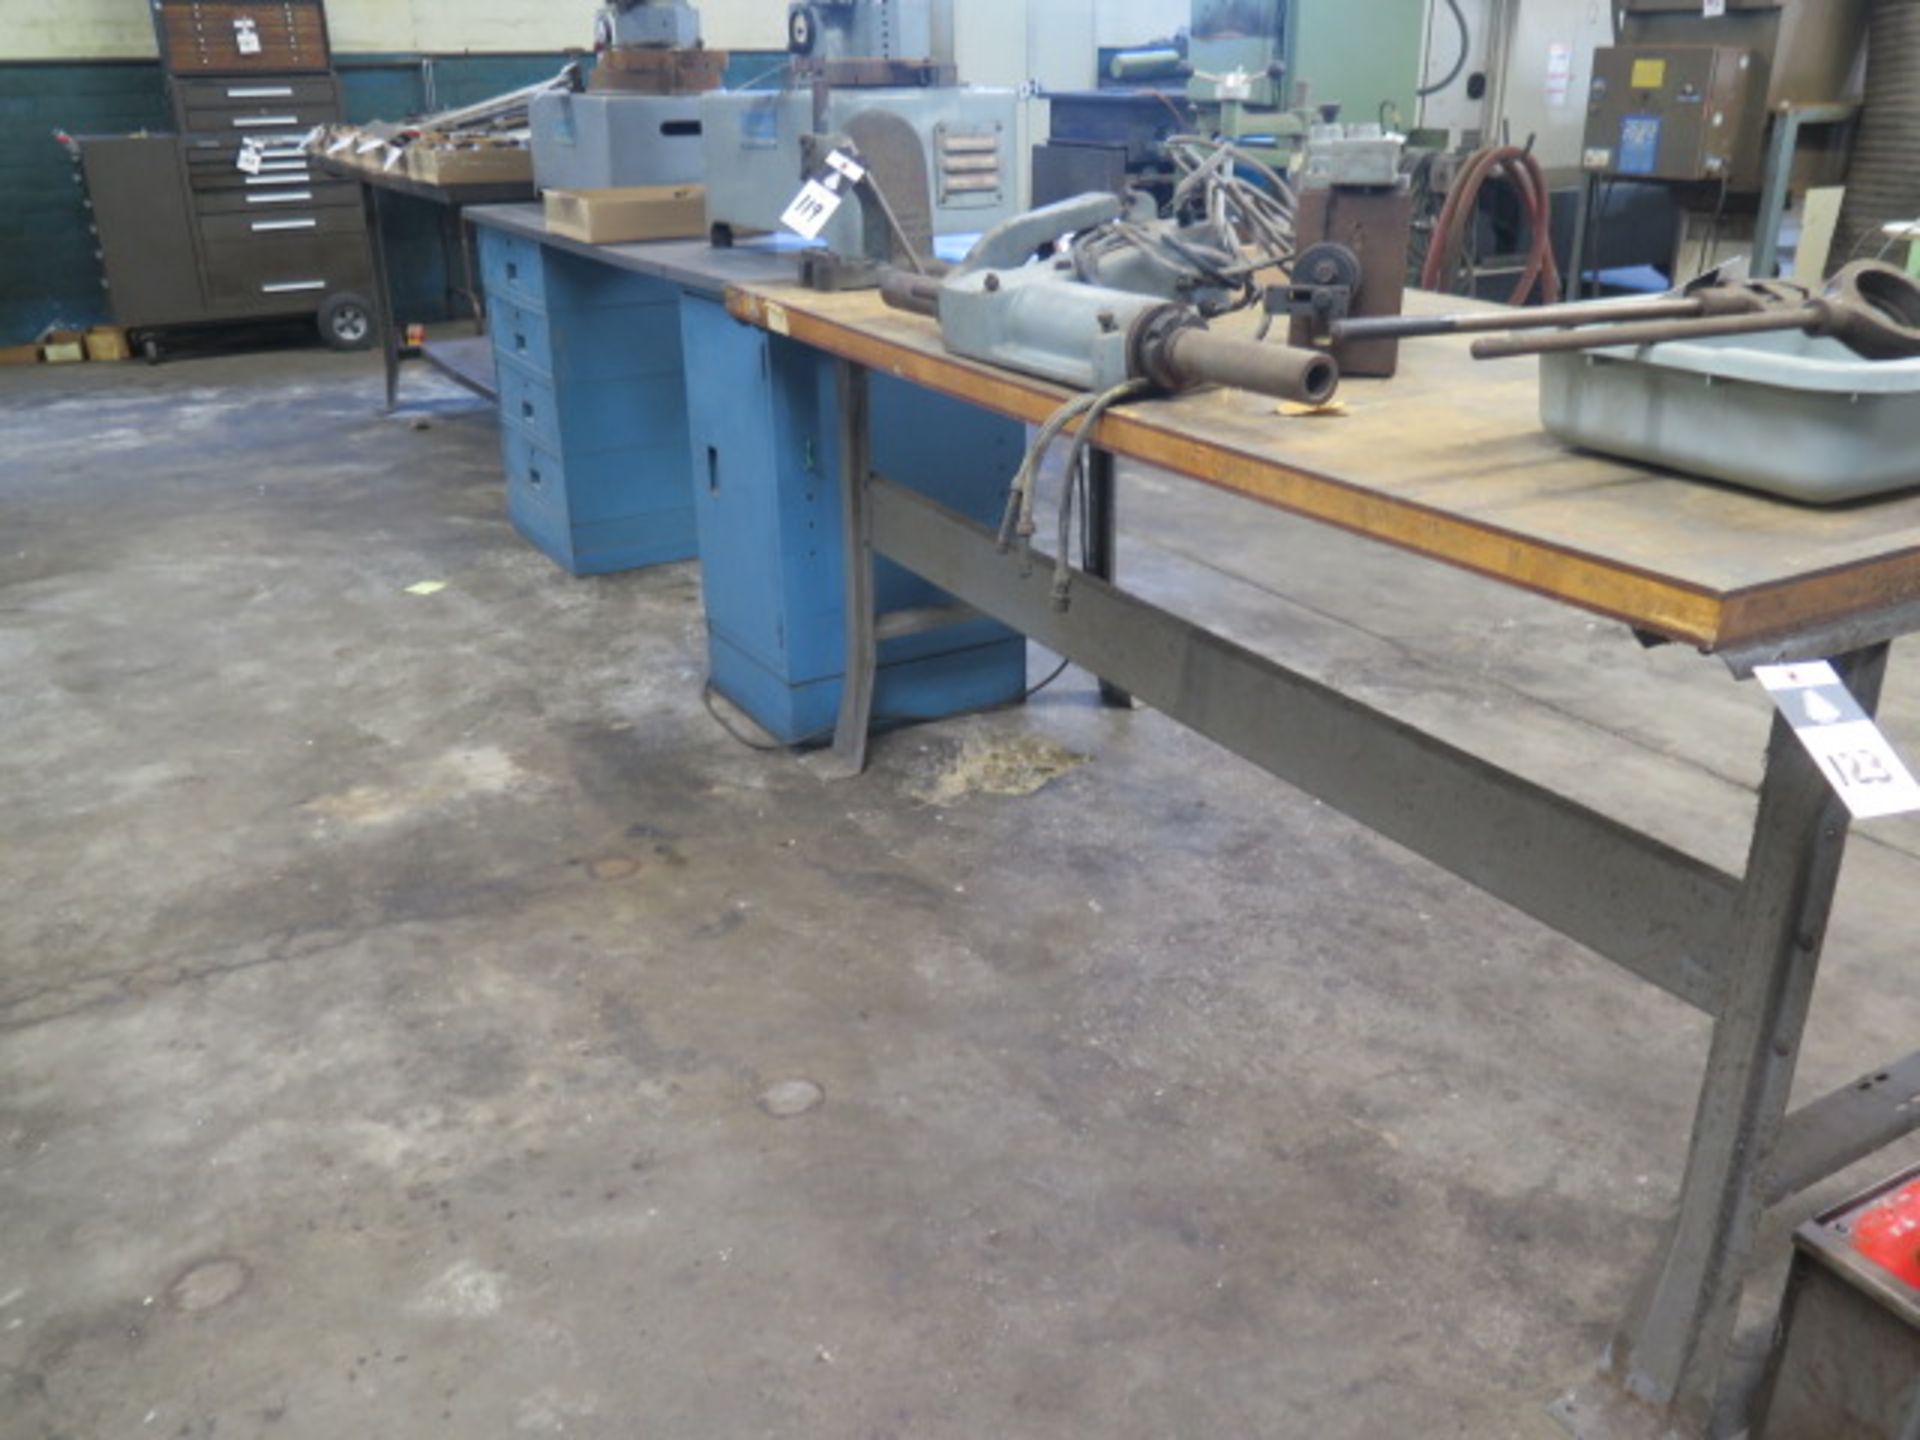 Work Benches (3) (SOLD AS-IS - NO WARRANTY)